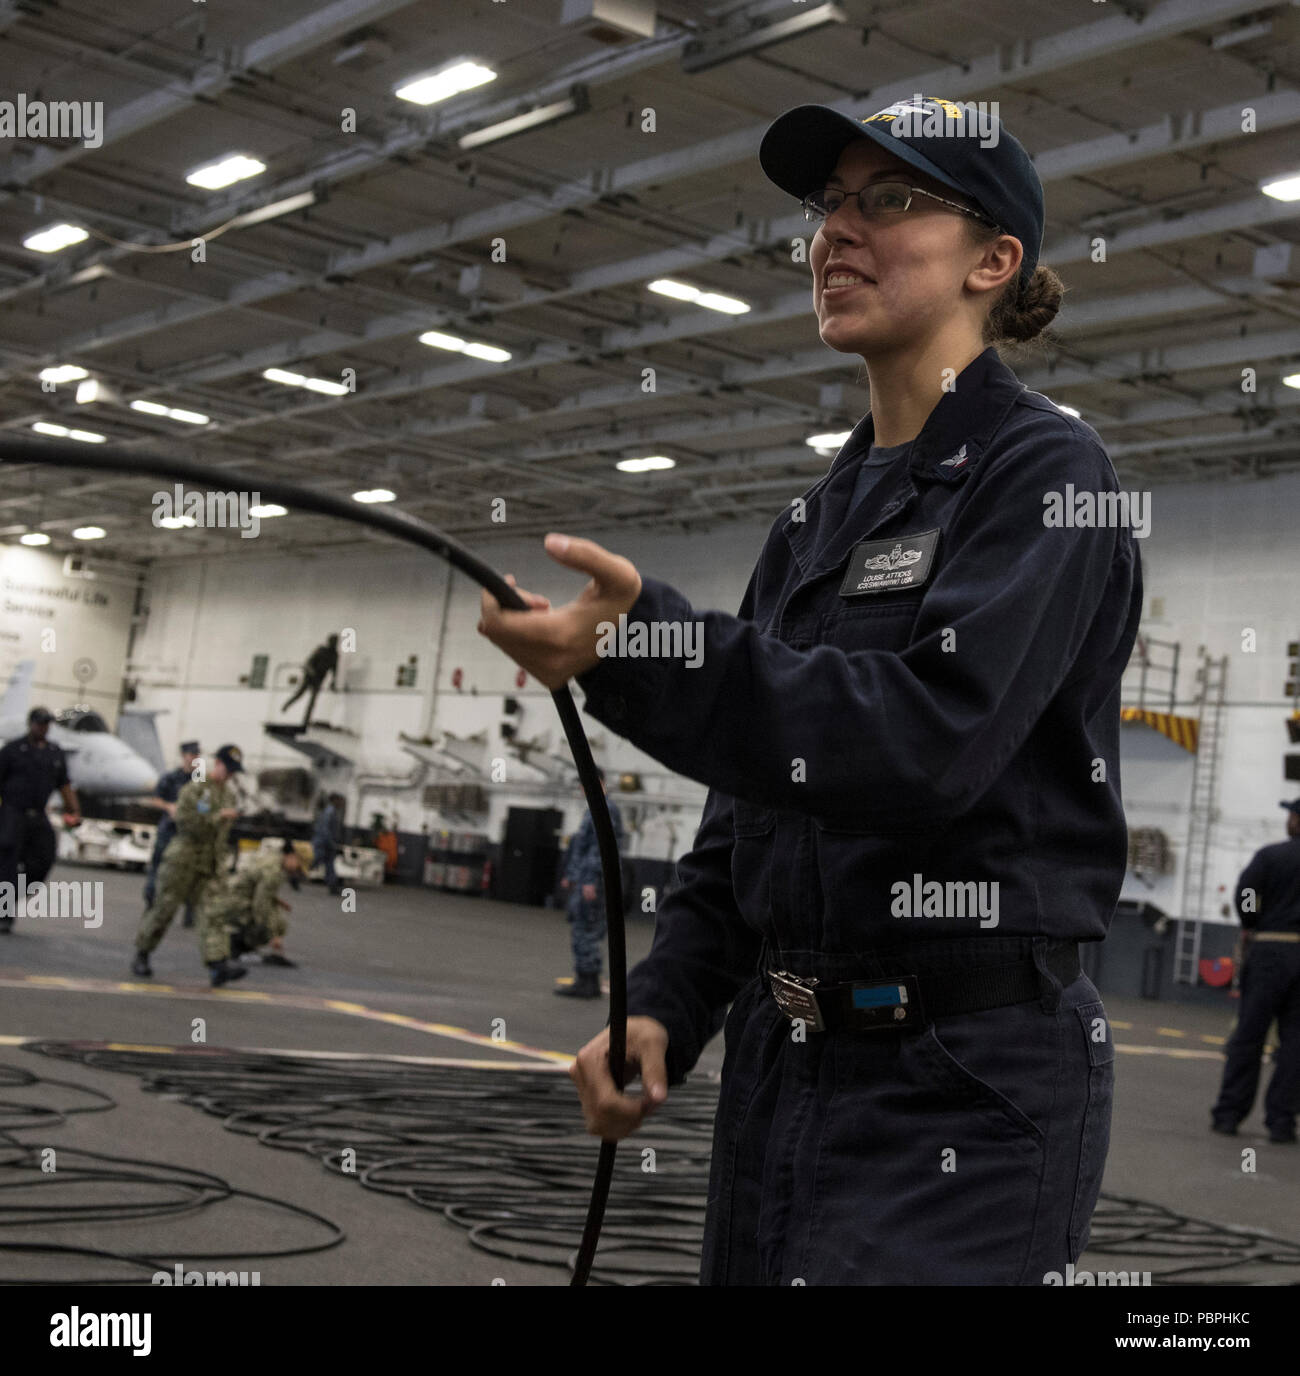 180725-N-FA806-0061 NORFOLK, Va. (July 25, 2018) Interior Communications Electrician 3rd Class Louise Atticks, from Harrisburg, Pennsylvania, coils plain old telephone system (POTS) lines during cleaning stations aboard the aircraft carrier USS George H.W. Bush (CVN 77). The ship is in port in Norfolk, Virginia, conducting routine training exercises to maintain carrier readiness.  (U.S. Navy photo by Mass Communication Specialist 3rd Class Roland John) Stock Photo